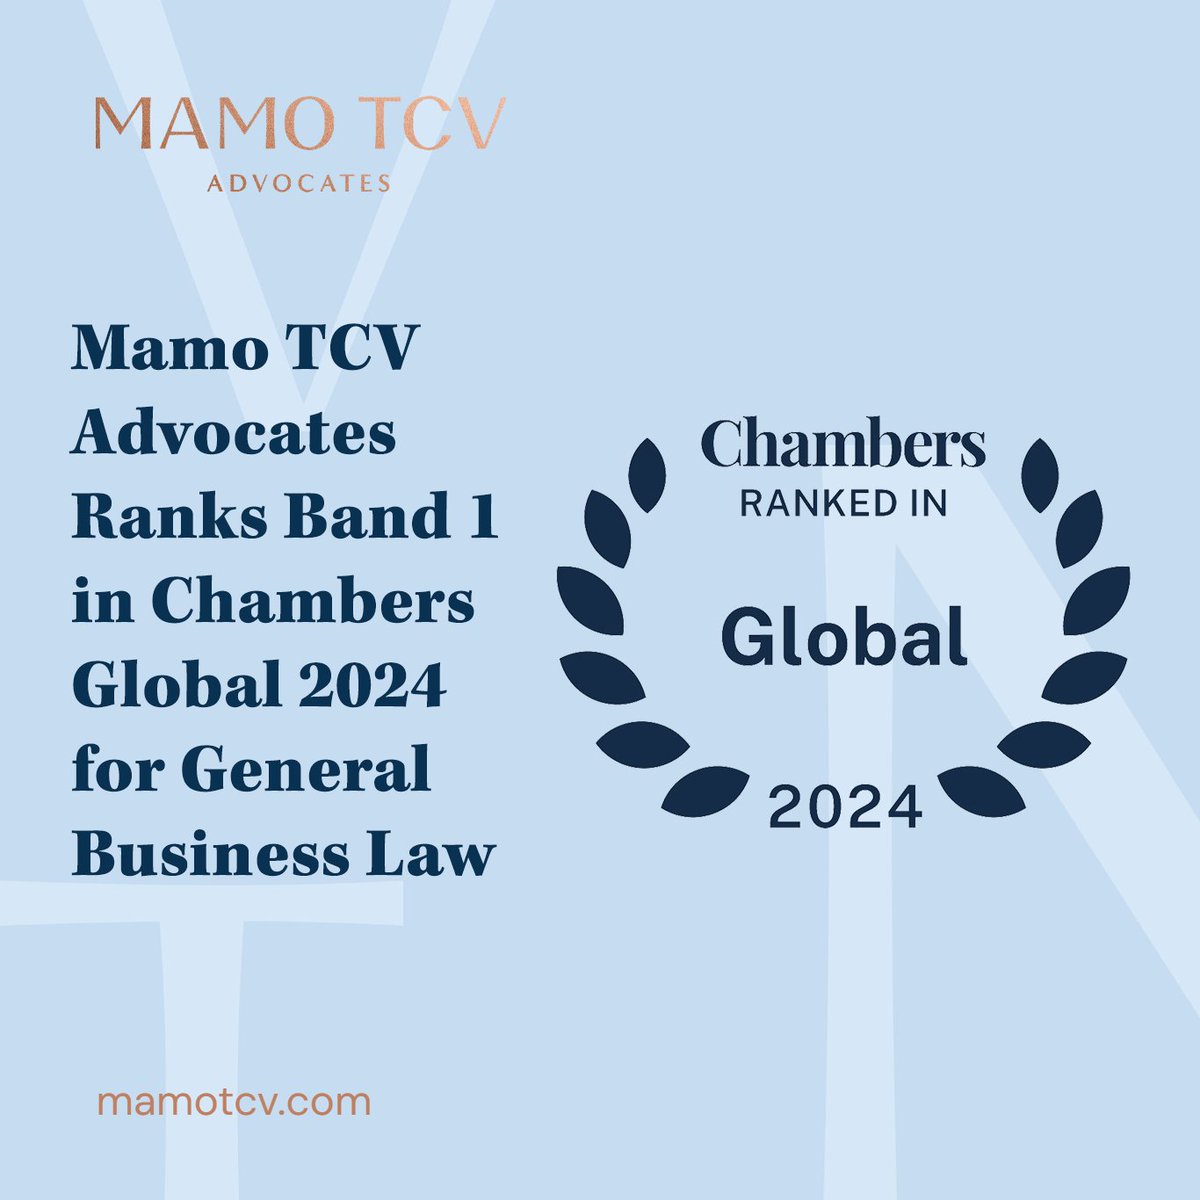 Chambers Global recently published its 2024 Global Guide and once again recognised Mamo TCV as one of the leading law firms in Malta.   Find out more on our website Insights.

#mamotcv #lawyersmalta #chambersglobal2024 #chambersglobal